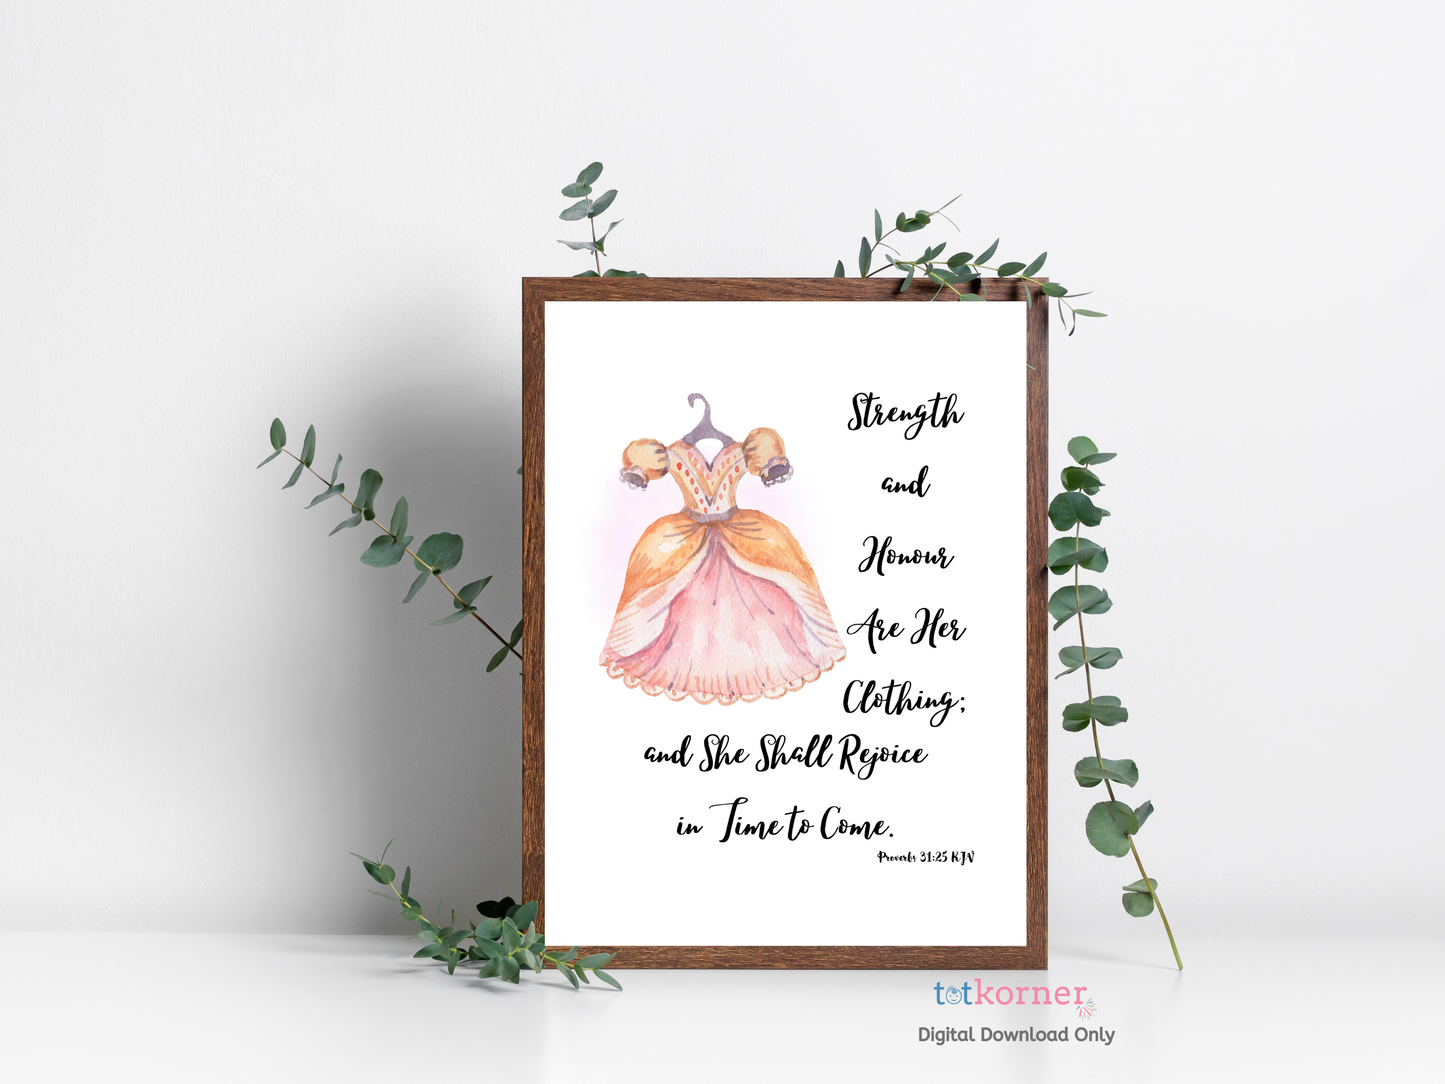 proverbs 31 25 wall art | Proverbs 31:25 She is clothed in strength and dignity she laughs without fear of the future Bible Verse Wall Art print Scripture printable